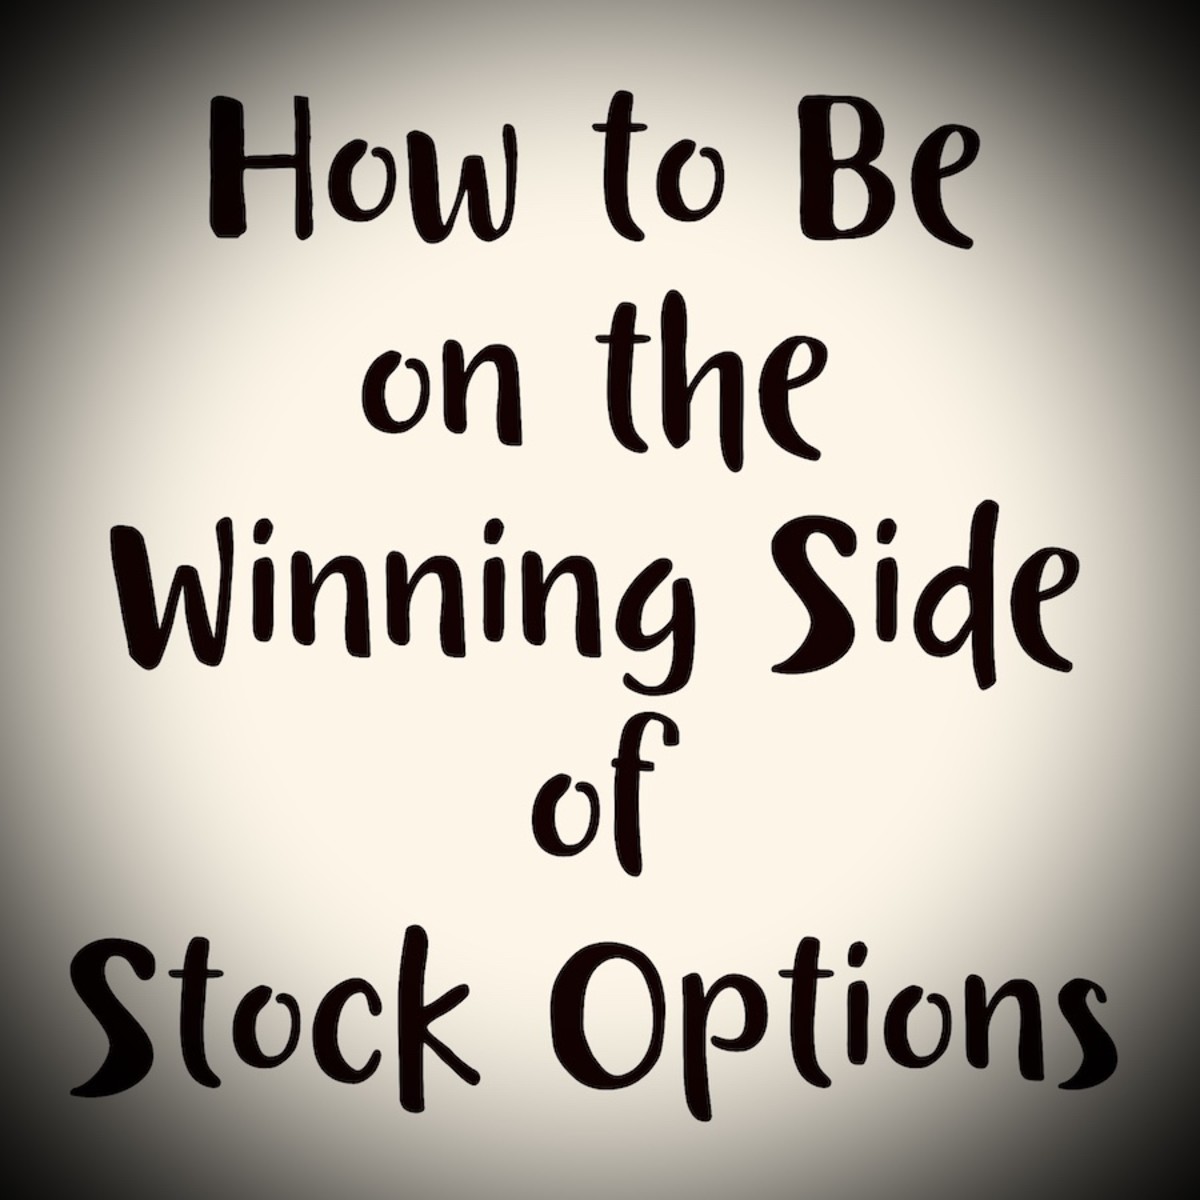 How to Be on the Winning Side of Stock Options